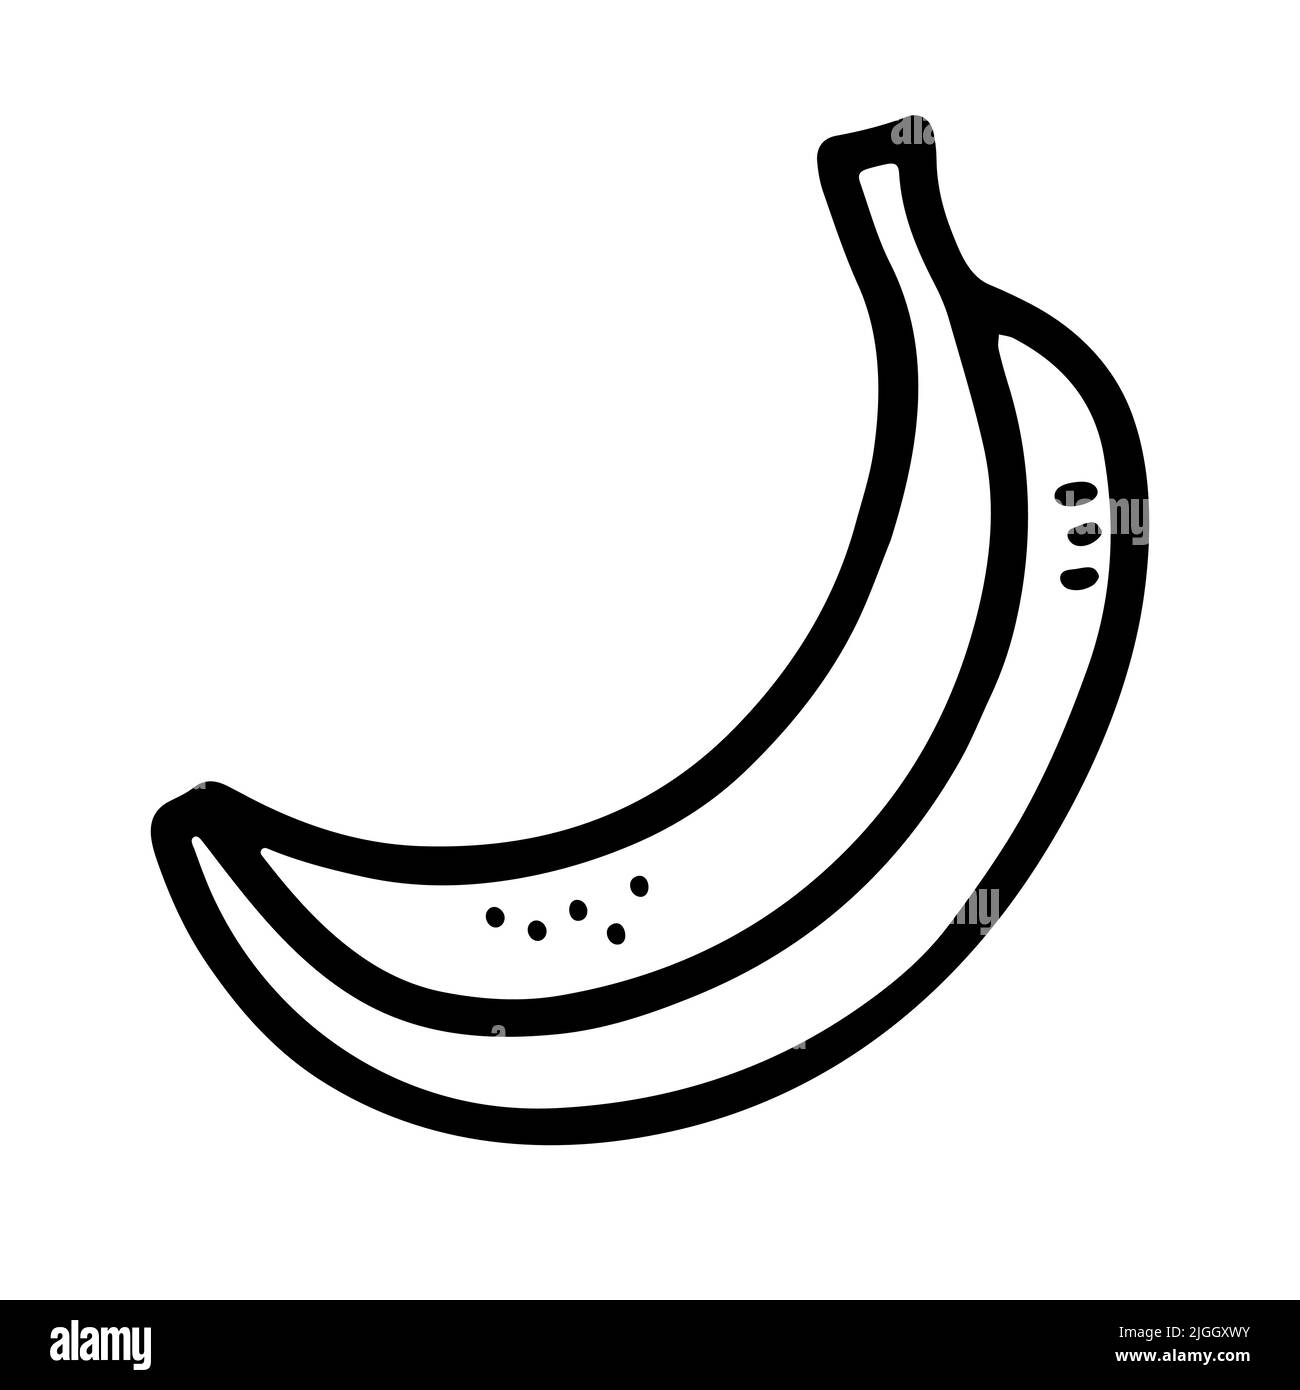 Doodle outline tropical banana. Hand-drawn fresh natural exotic fruit isolated on white background. Line healthy vegetarian food, vitamin, delicious o Stock Vector